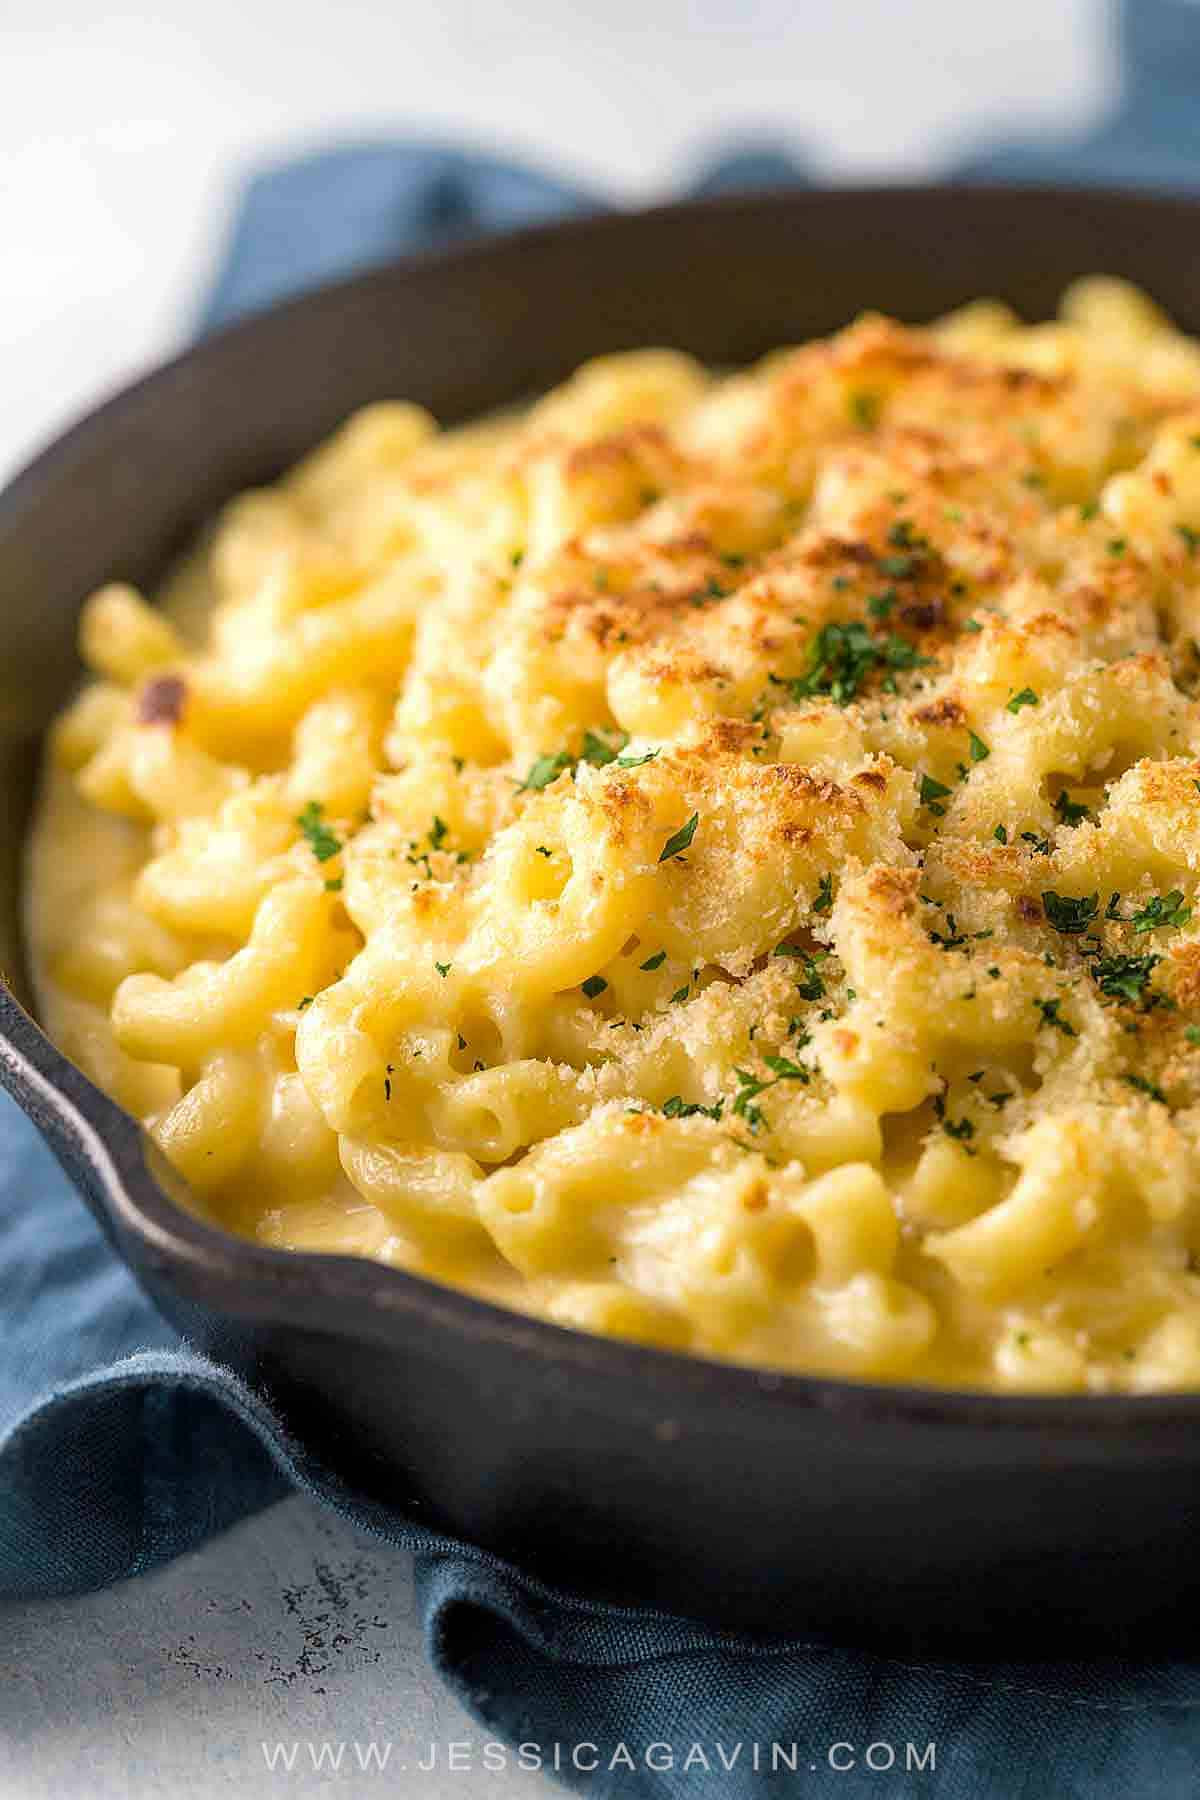 Best Macaroni And Cheese Recipe Baked
 Baked Macaroni and Cheese Jessica Gavin